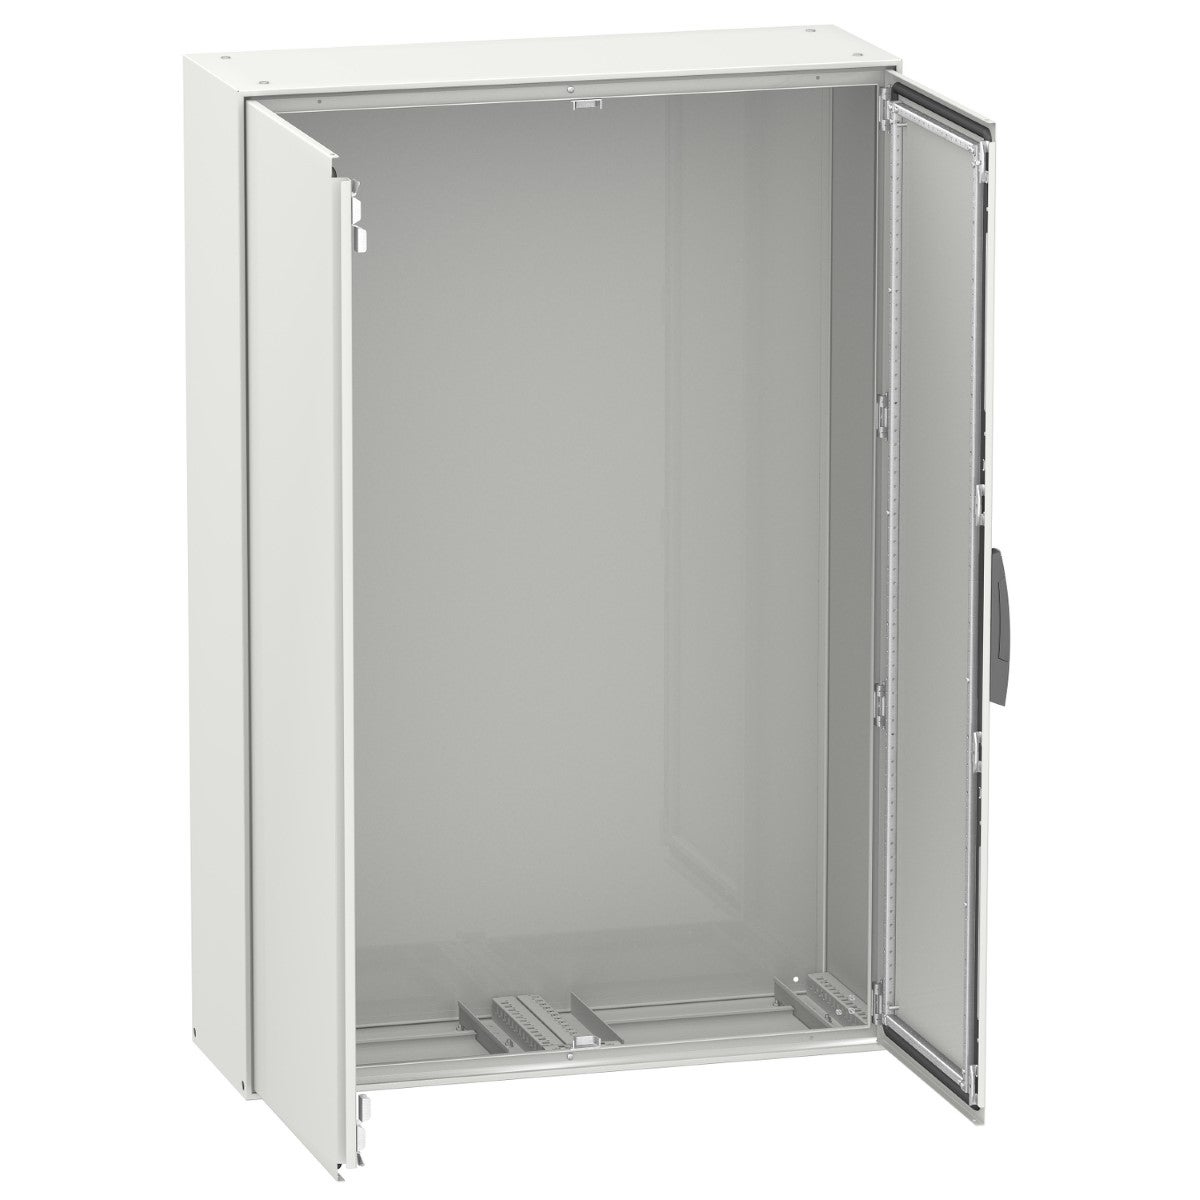 Spacial SM compact enclosure with mounting plate - 1800x1200x500 mm